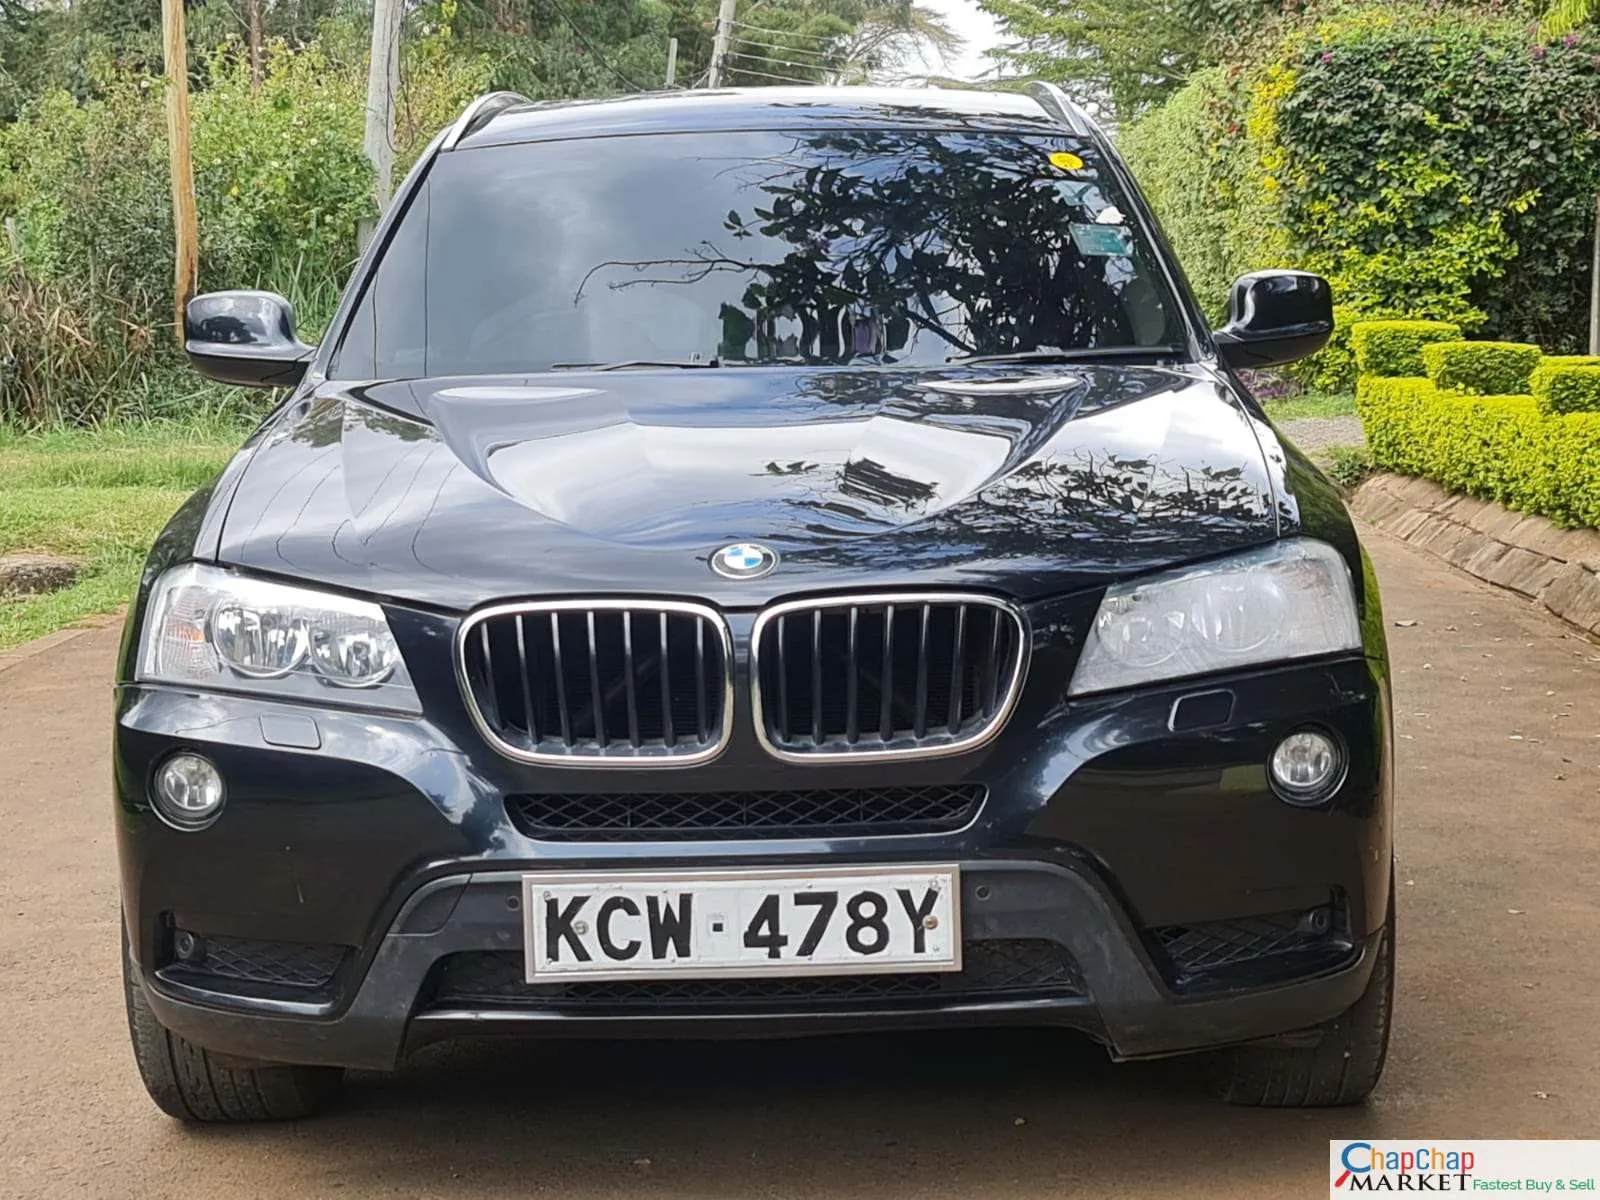 Bmw X3 for sale in Kenya Fully Loaded 🔥 You Pay 30% deposit Trade in Ok EXCLUSIVE